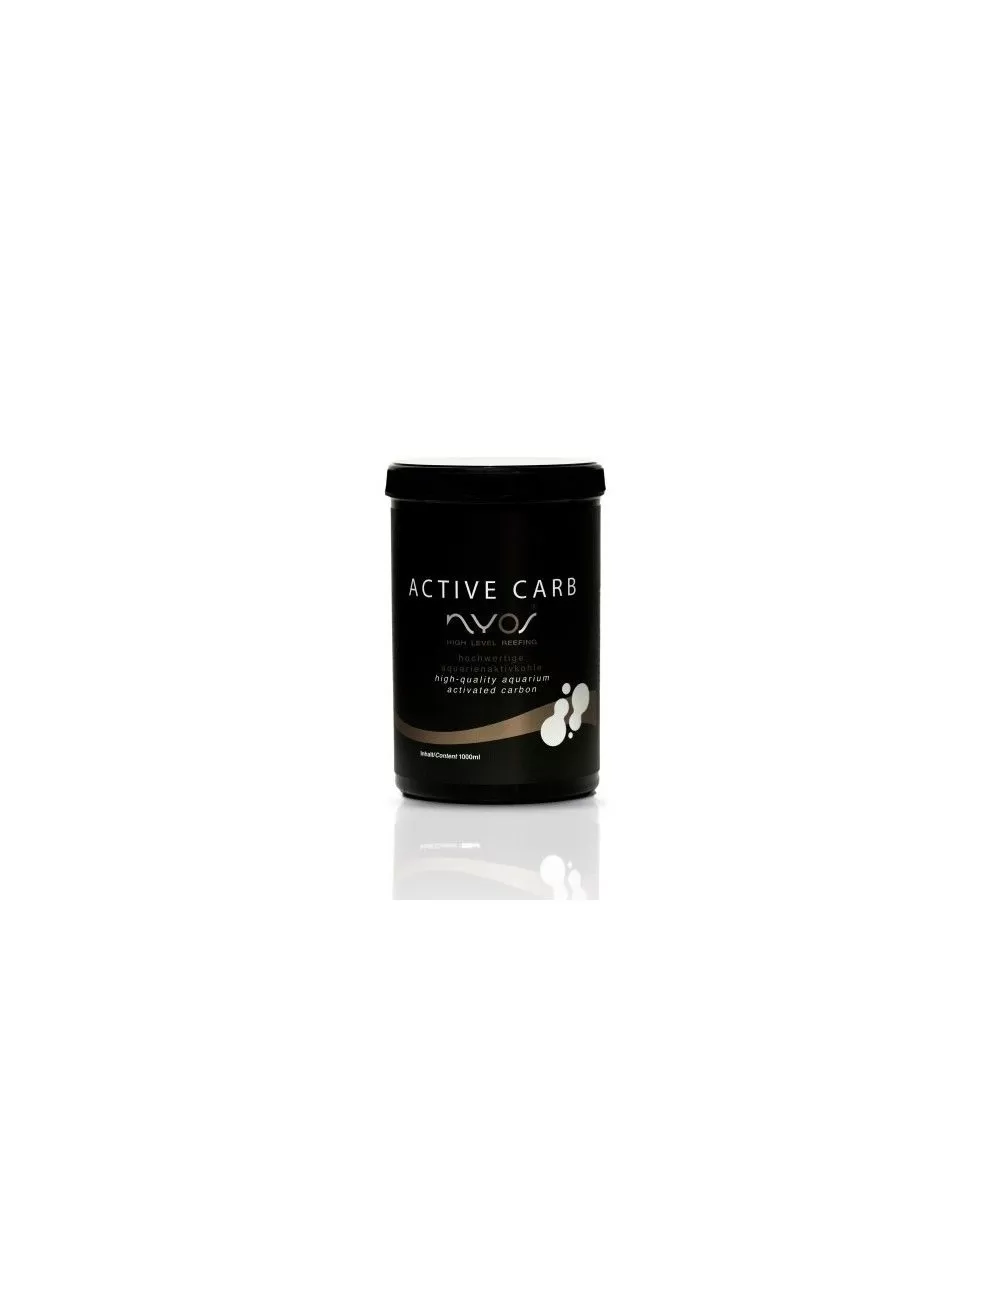 NYOS - Active Carb - 1000ml - Activated Charcoal